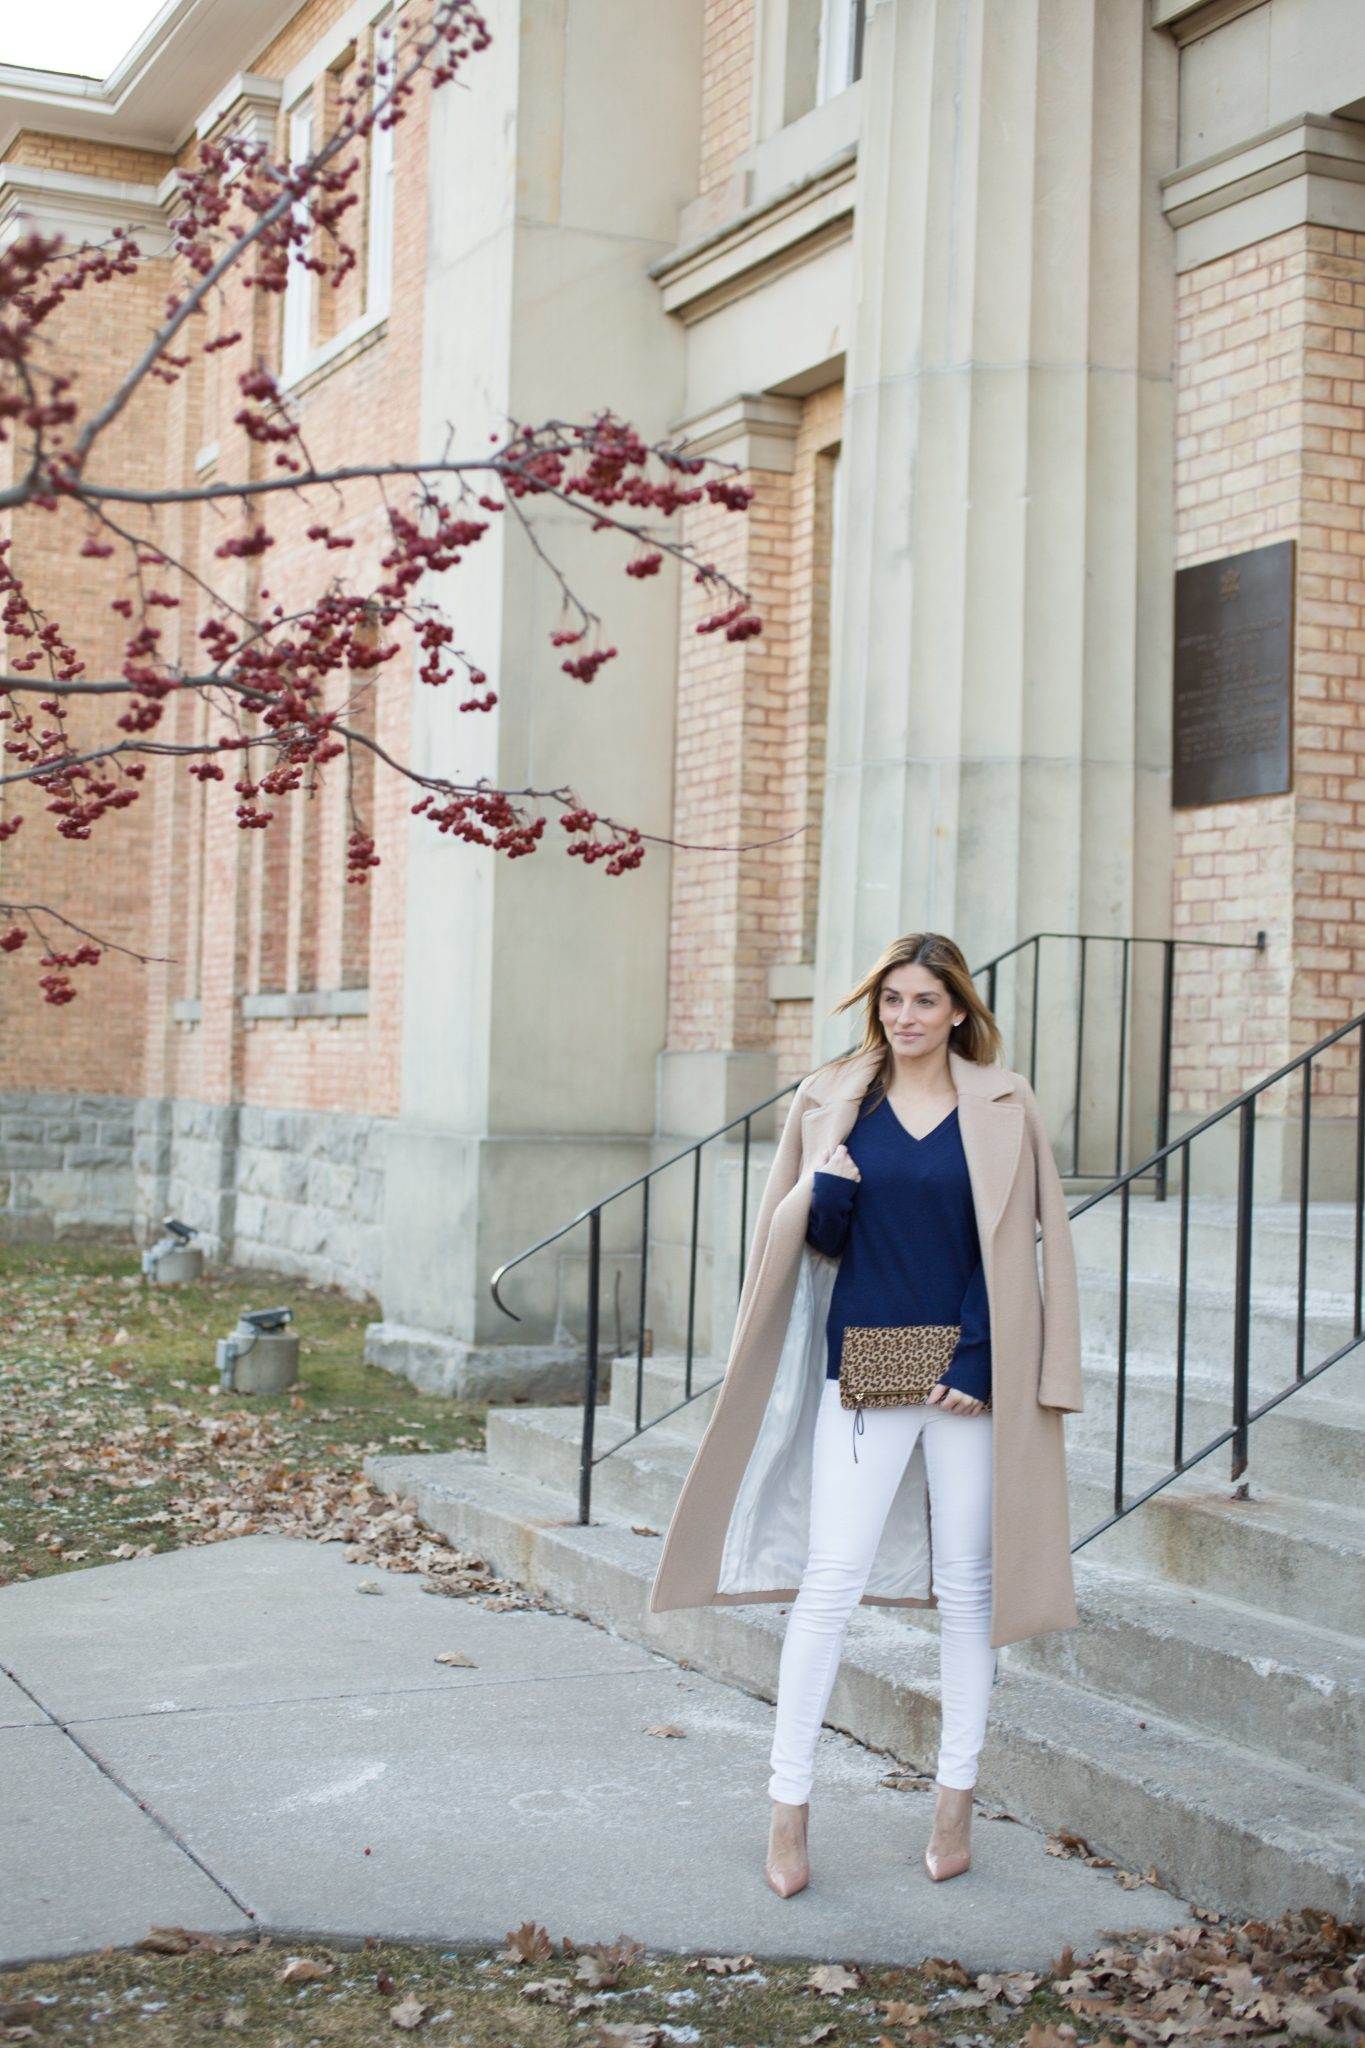 Navy Cashmere sweater from Uniqlo, white skinny jeans, long camel coat, leaopard clutch from Charming Charlie and Nude Christian Louboutin So Kate Pumps